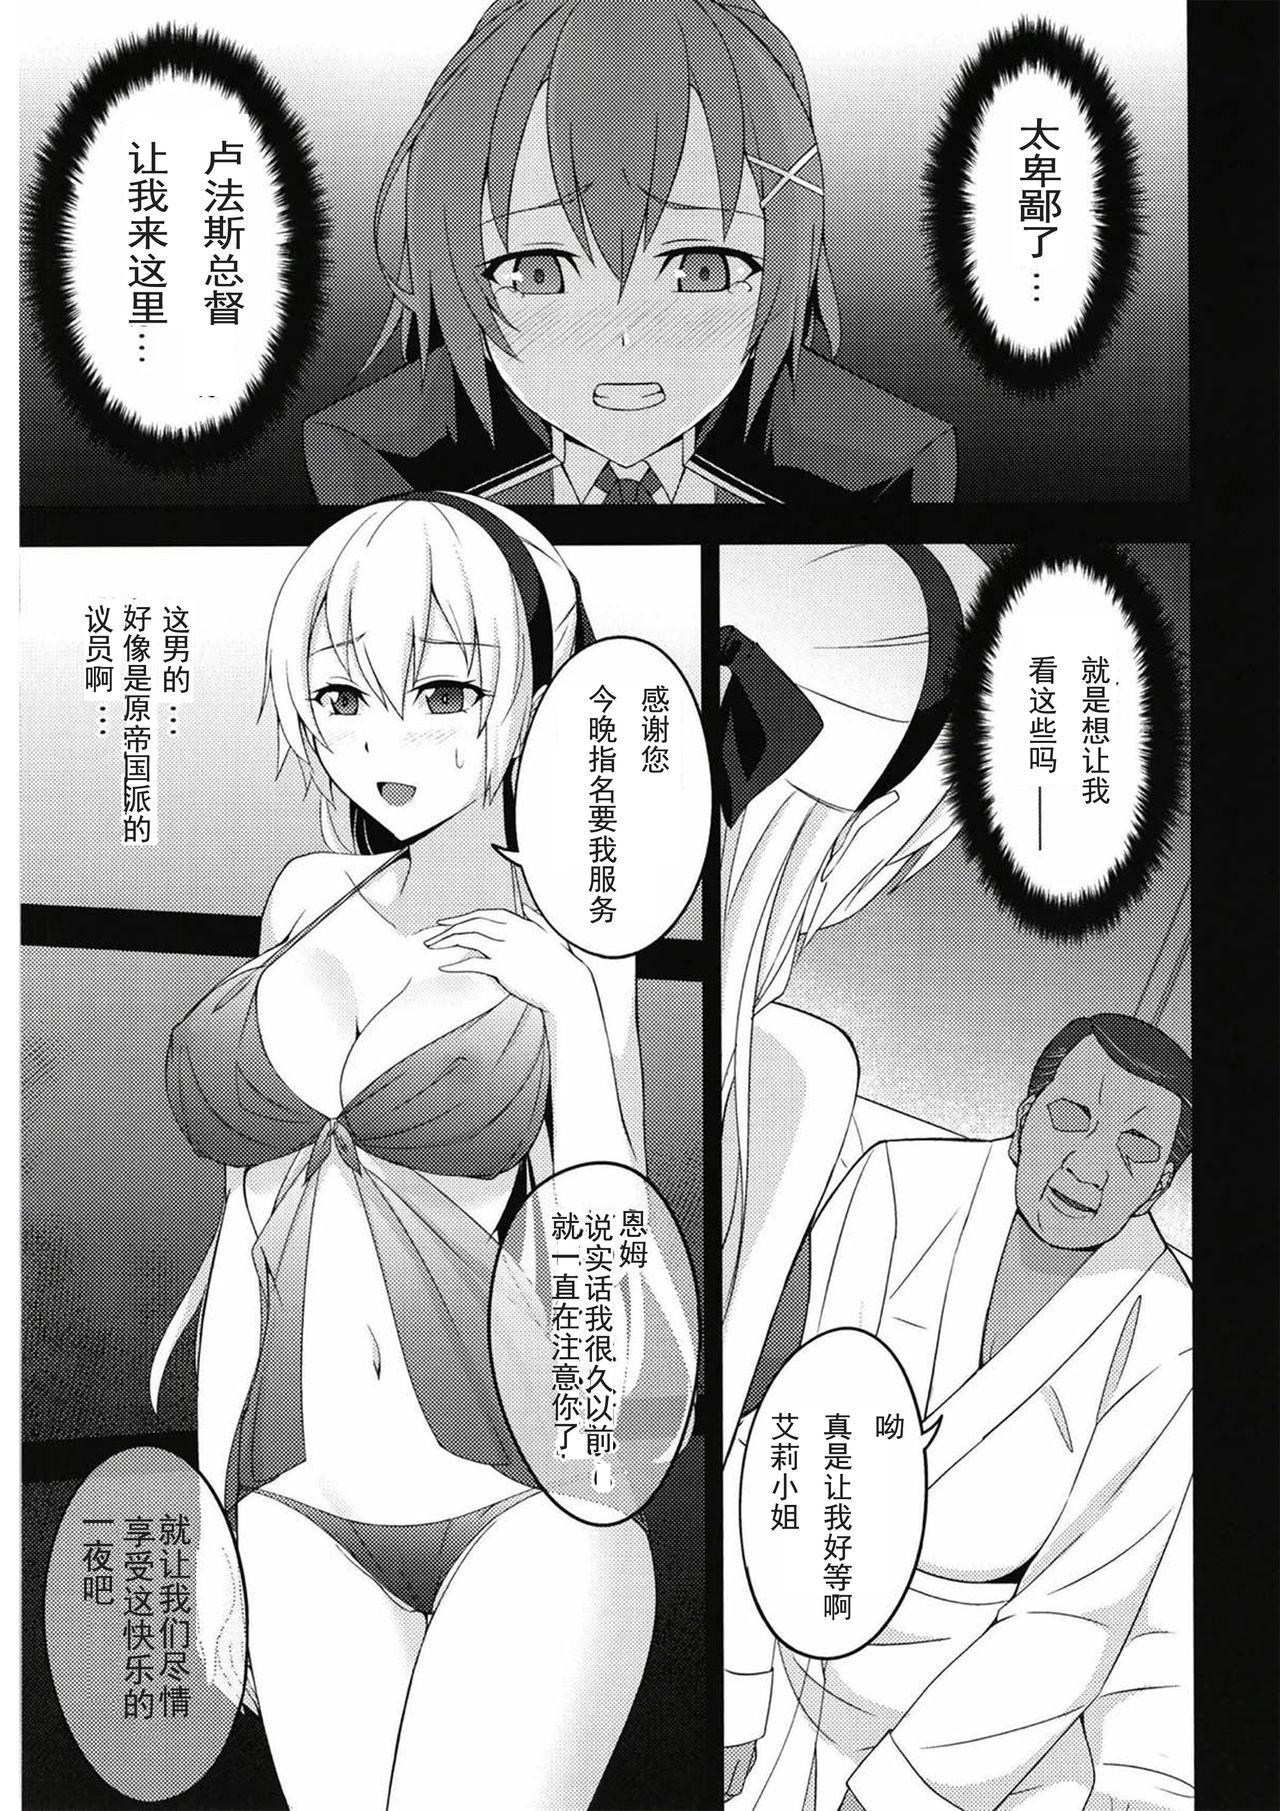 Gayhardcore Torikago no Yoru - The legend of heroes Hardcore Sex - Page 10